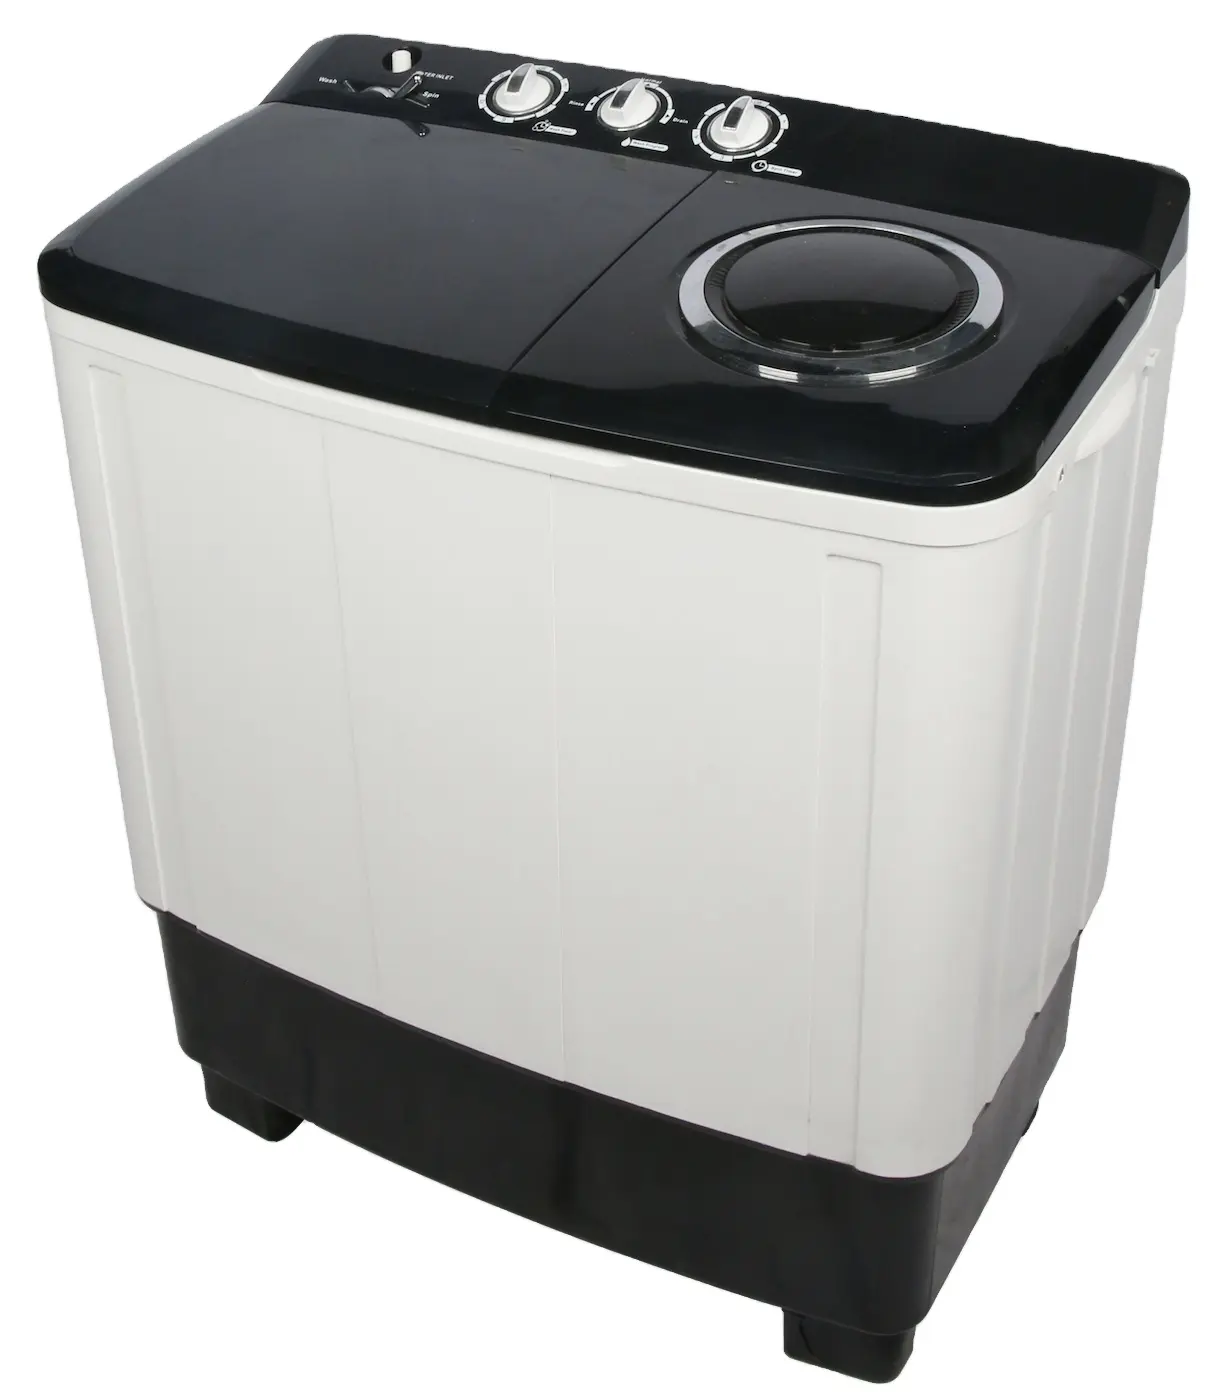 Popular 5-15KG Black Color Twin Tub Semi Auto Laundry Washer Washing Machines with Dryer